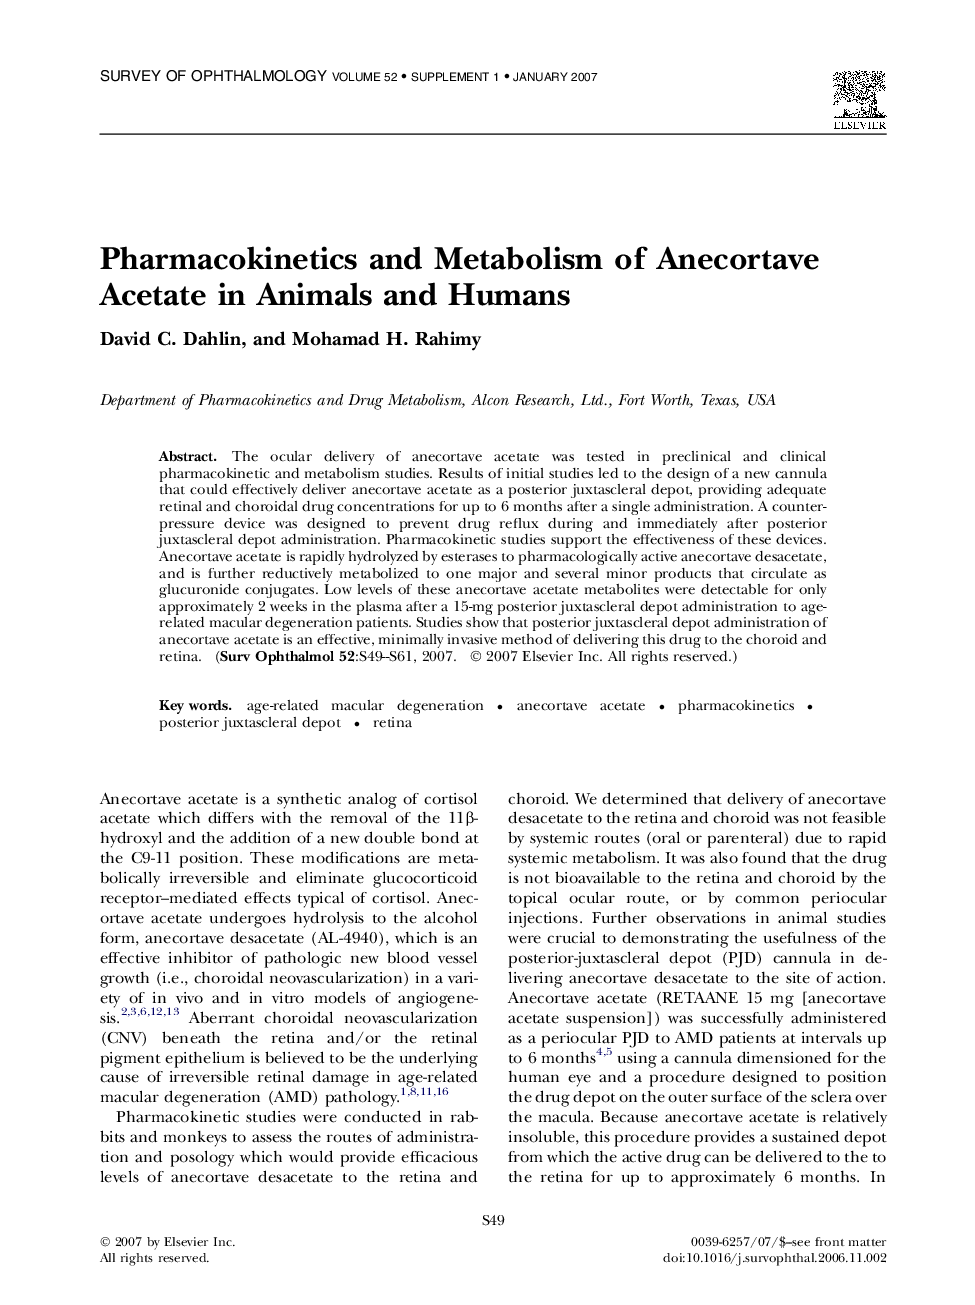 Pharmacokinetics and Metabolism of Anecortave Acetate in Animals and Humans 